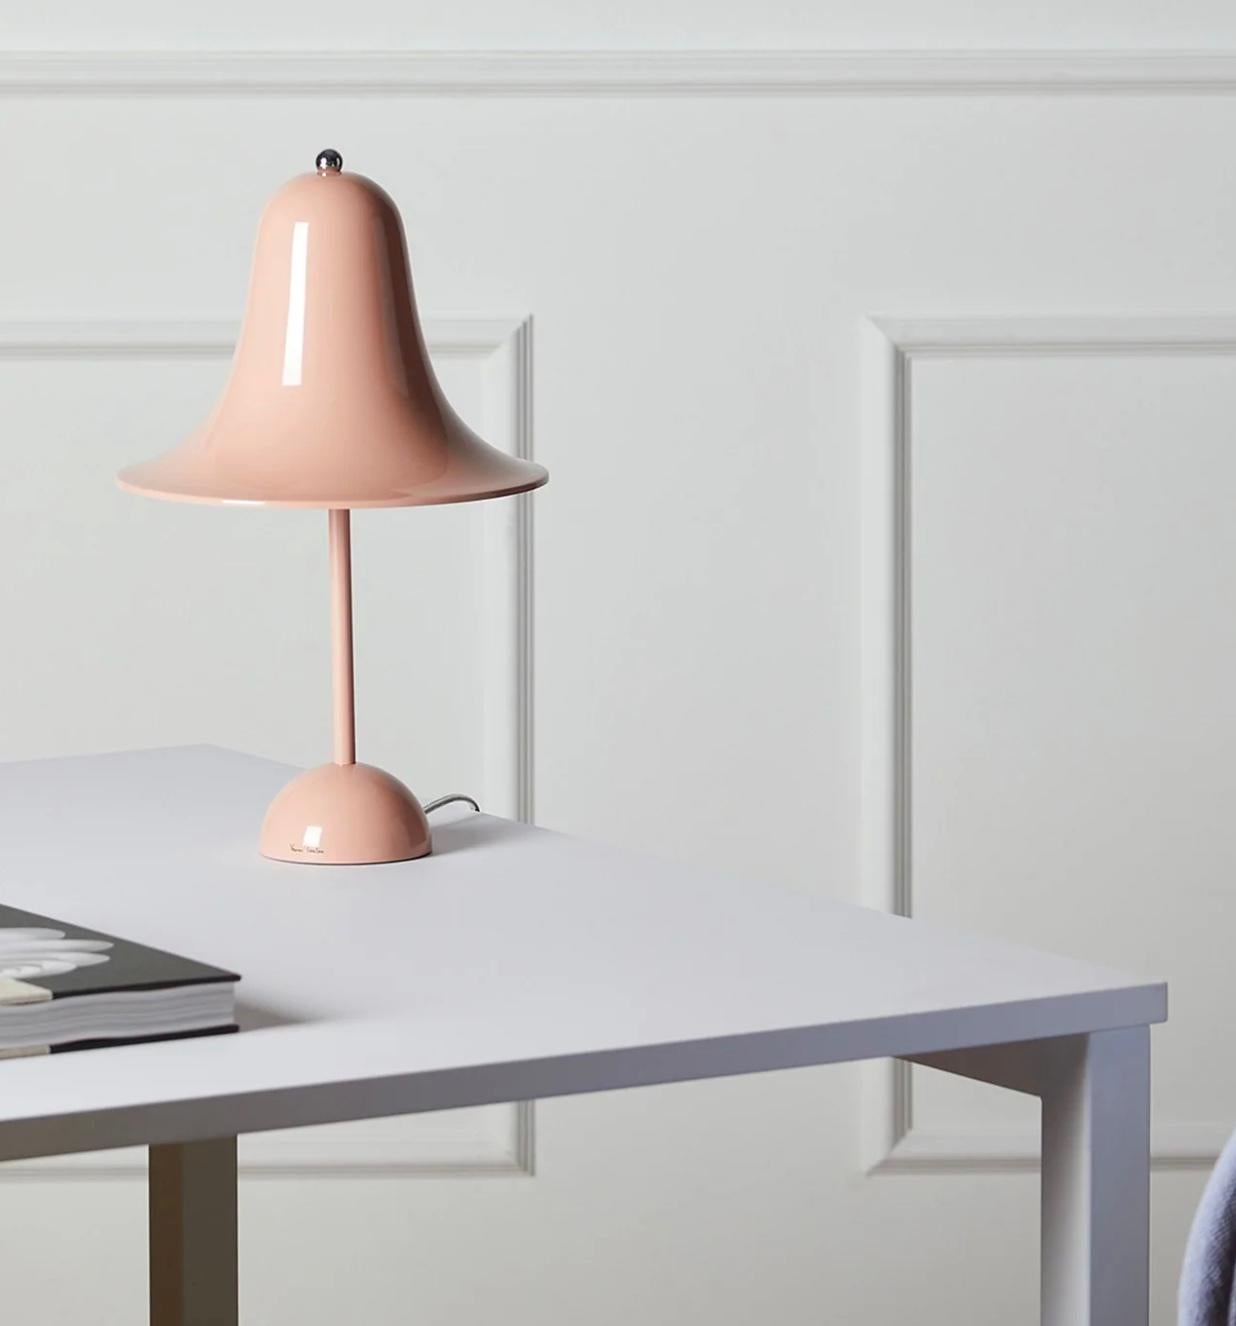 Verner Panton 'Pantop' table lamp in 'Dusty Rose' for Verpan. Designed in 1980. New, current production.

The elegant Pantop line was designed by Verner Panton in 1980, and has for a long time been a staple of the Verpan collection. Pantop is